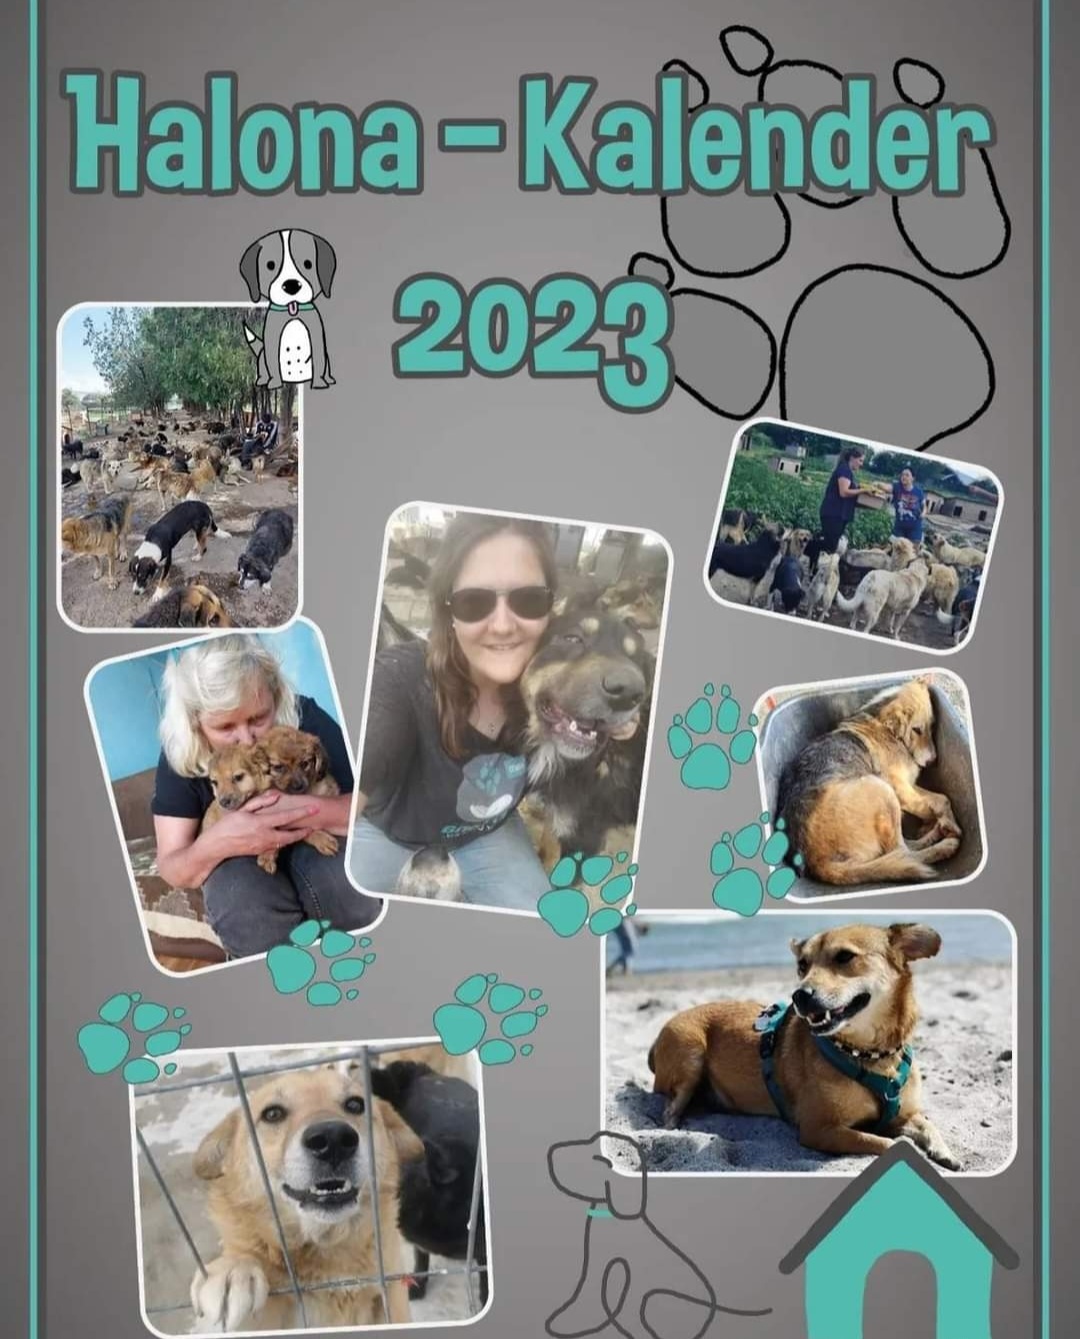 You are currently viewing Der Halona-Kalender 2023